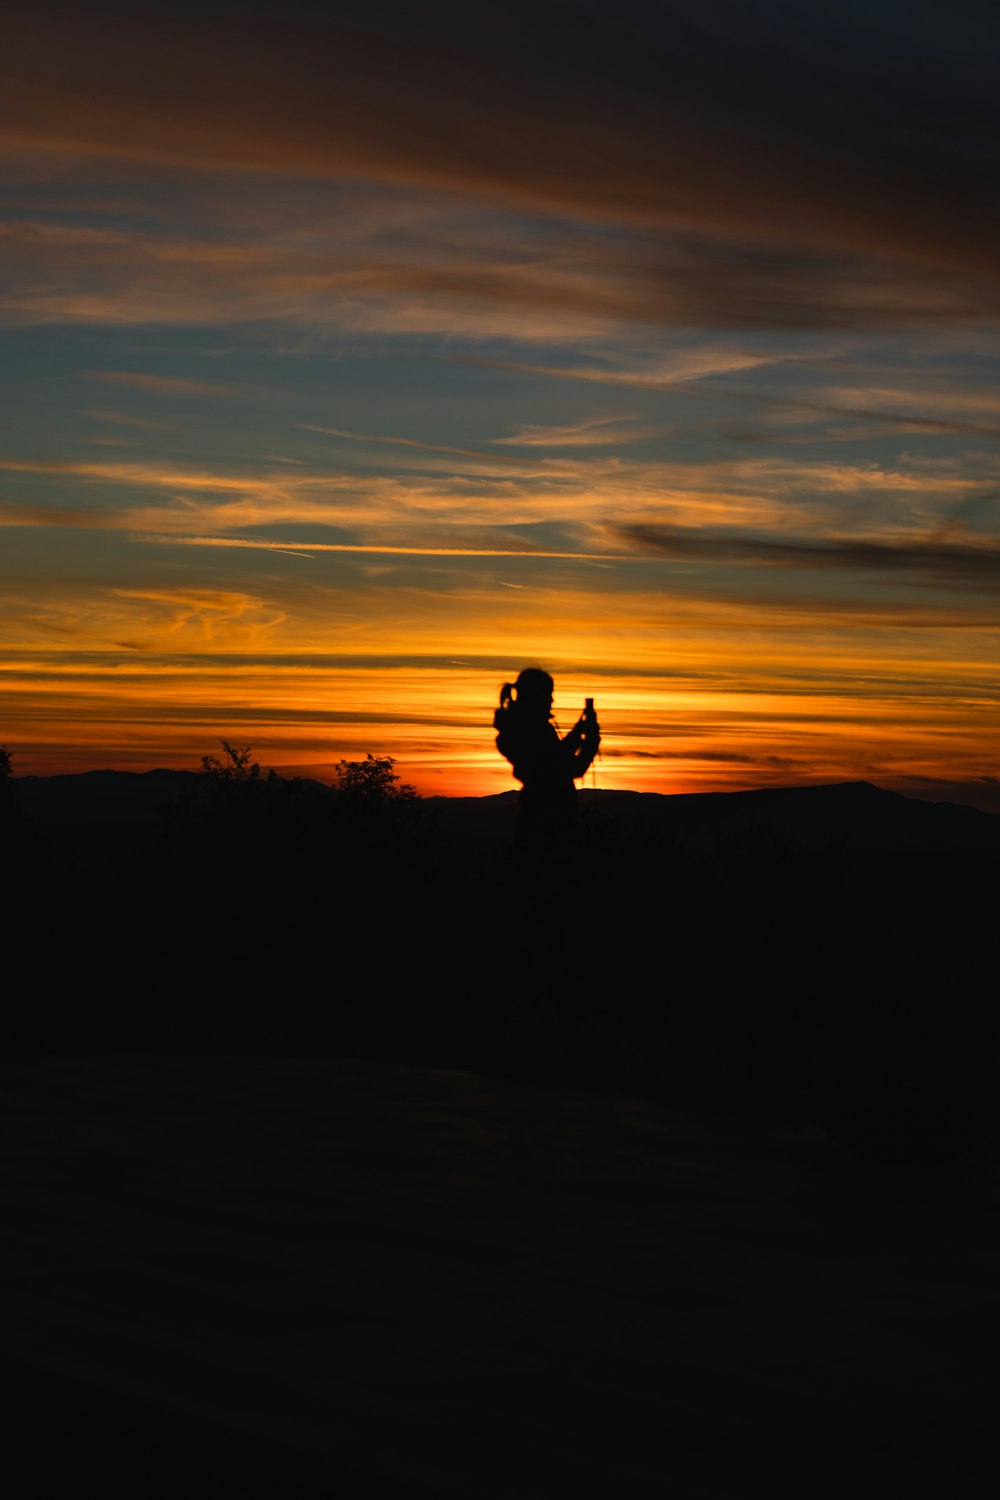 a silhouette of a person and a dog on a hill at sunset